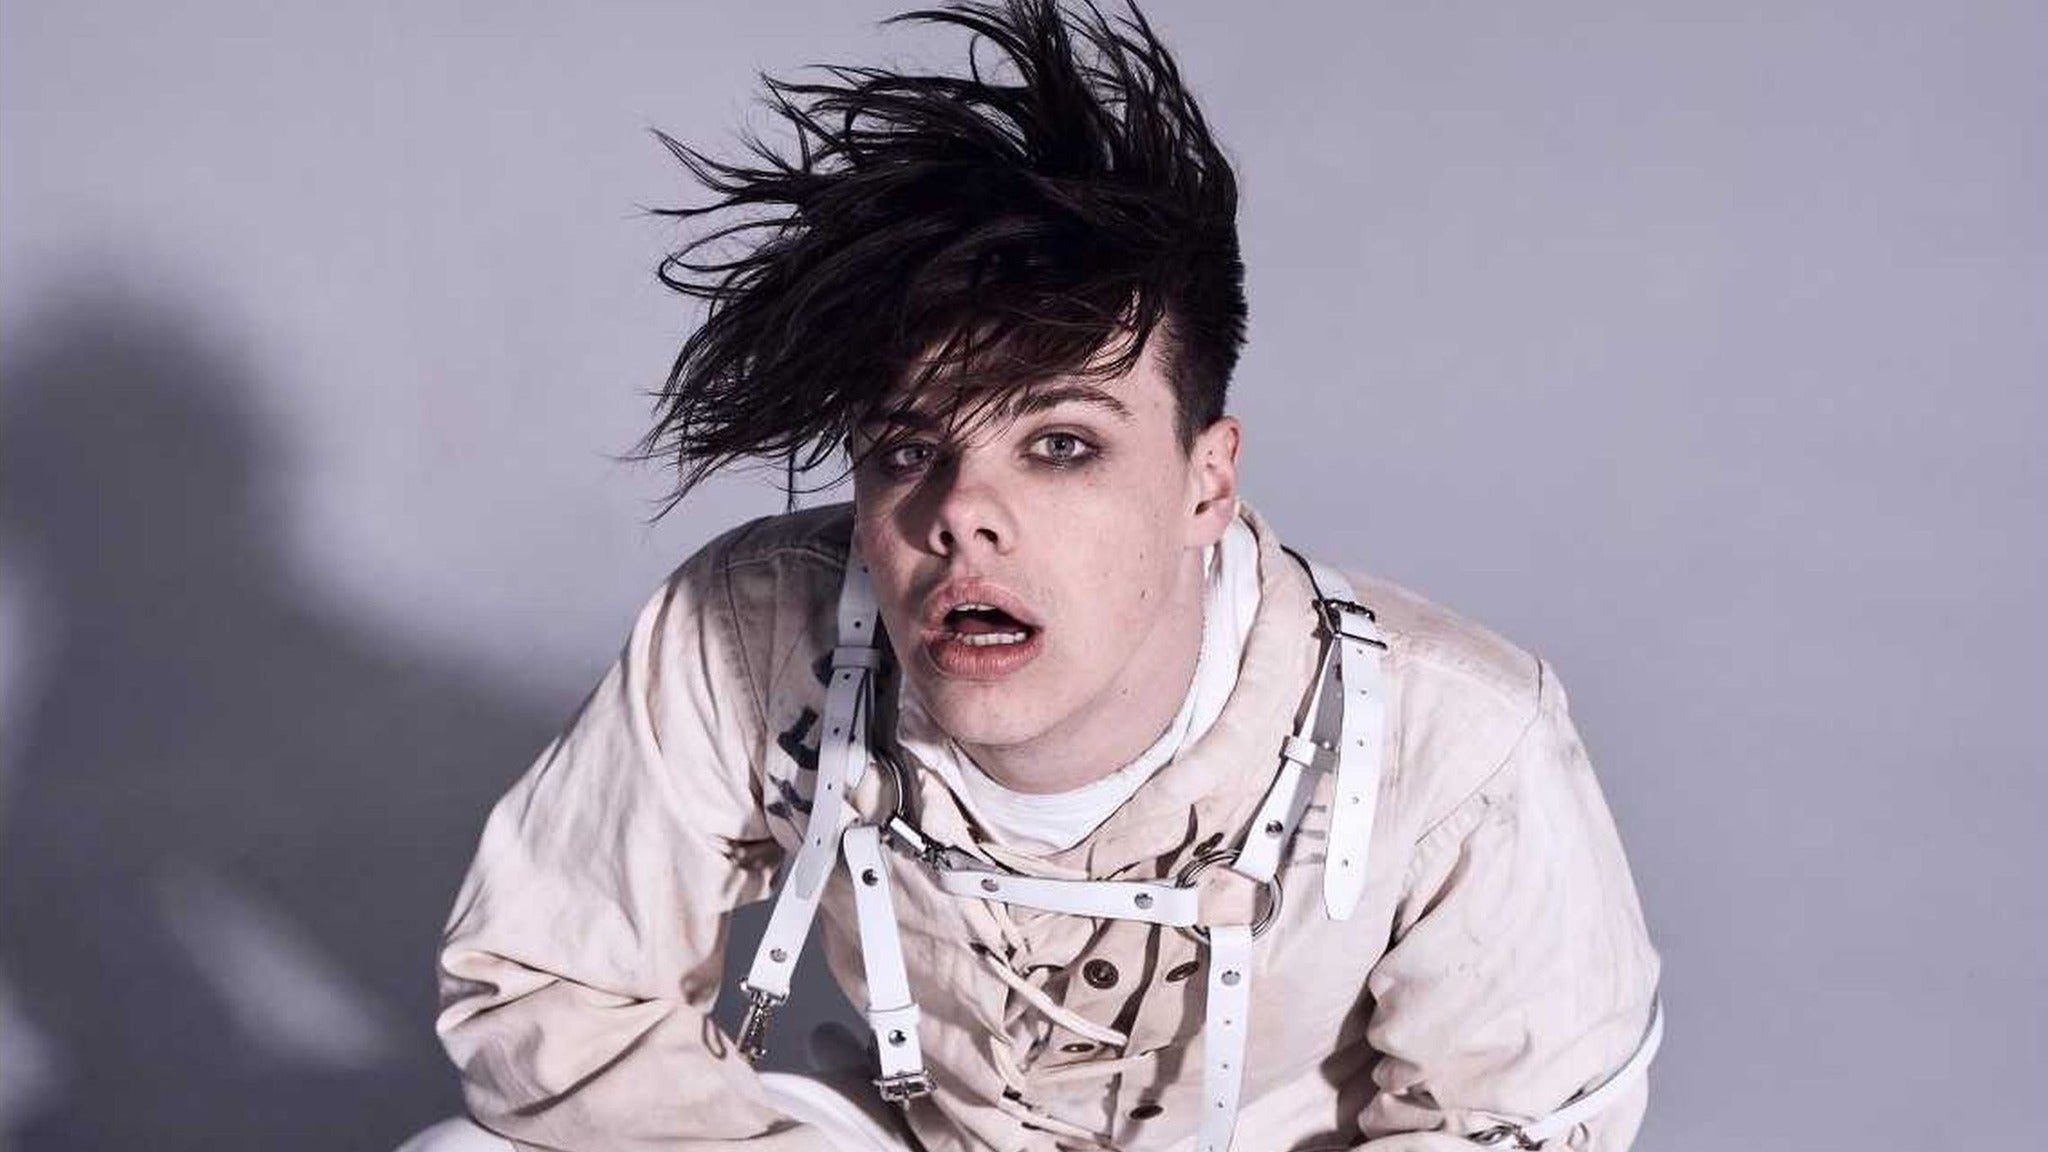 Yungblud: The Underrated Youth Tour (Postponed)